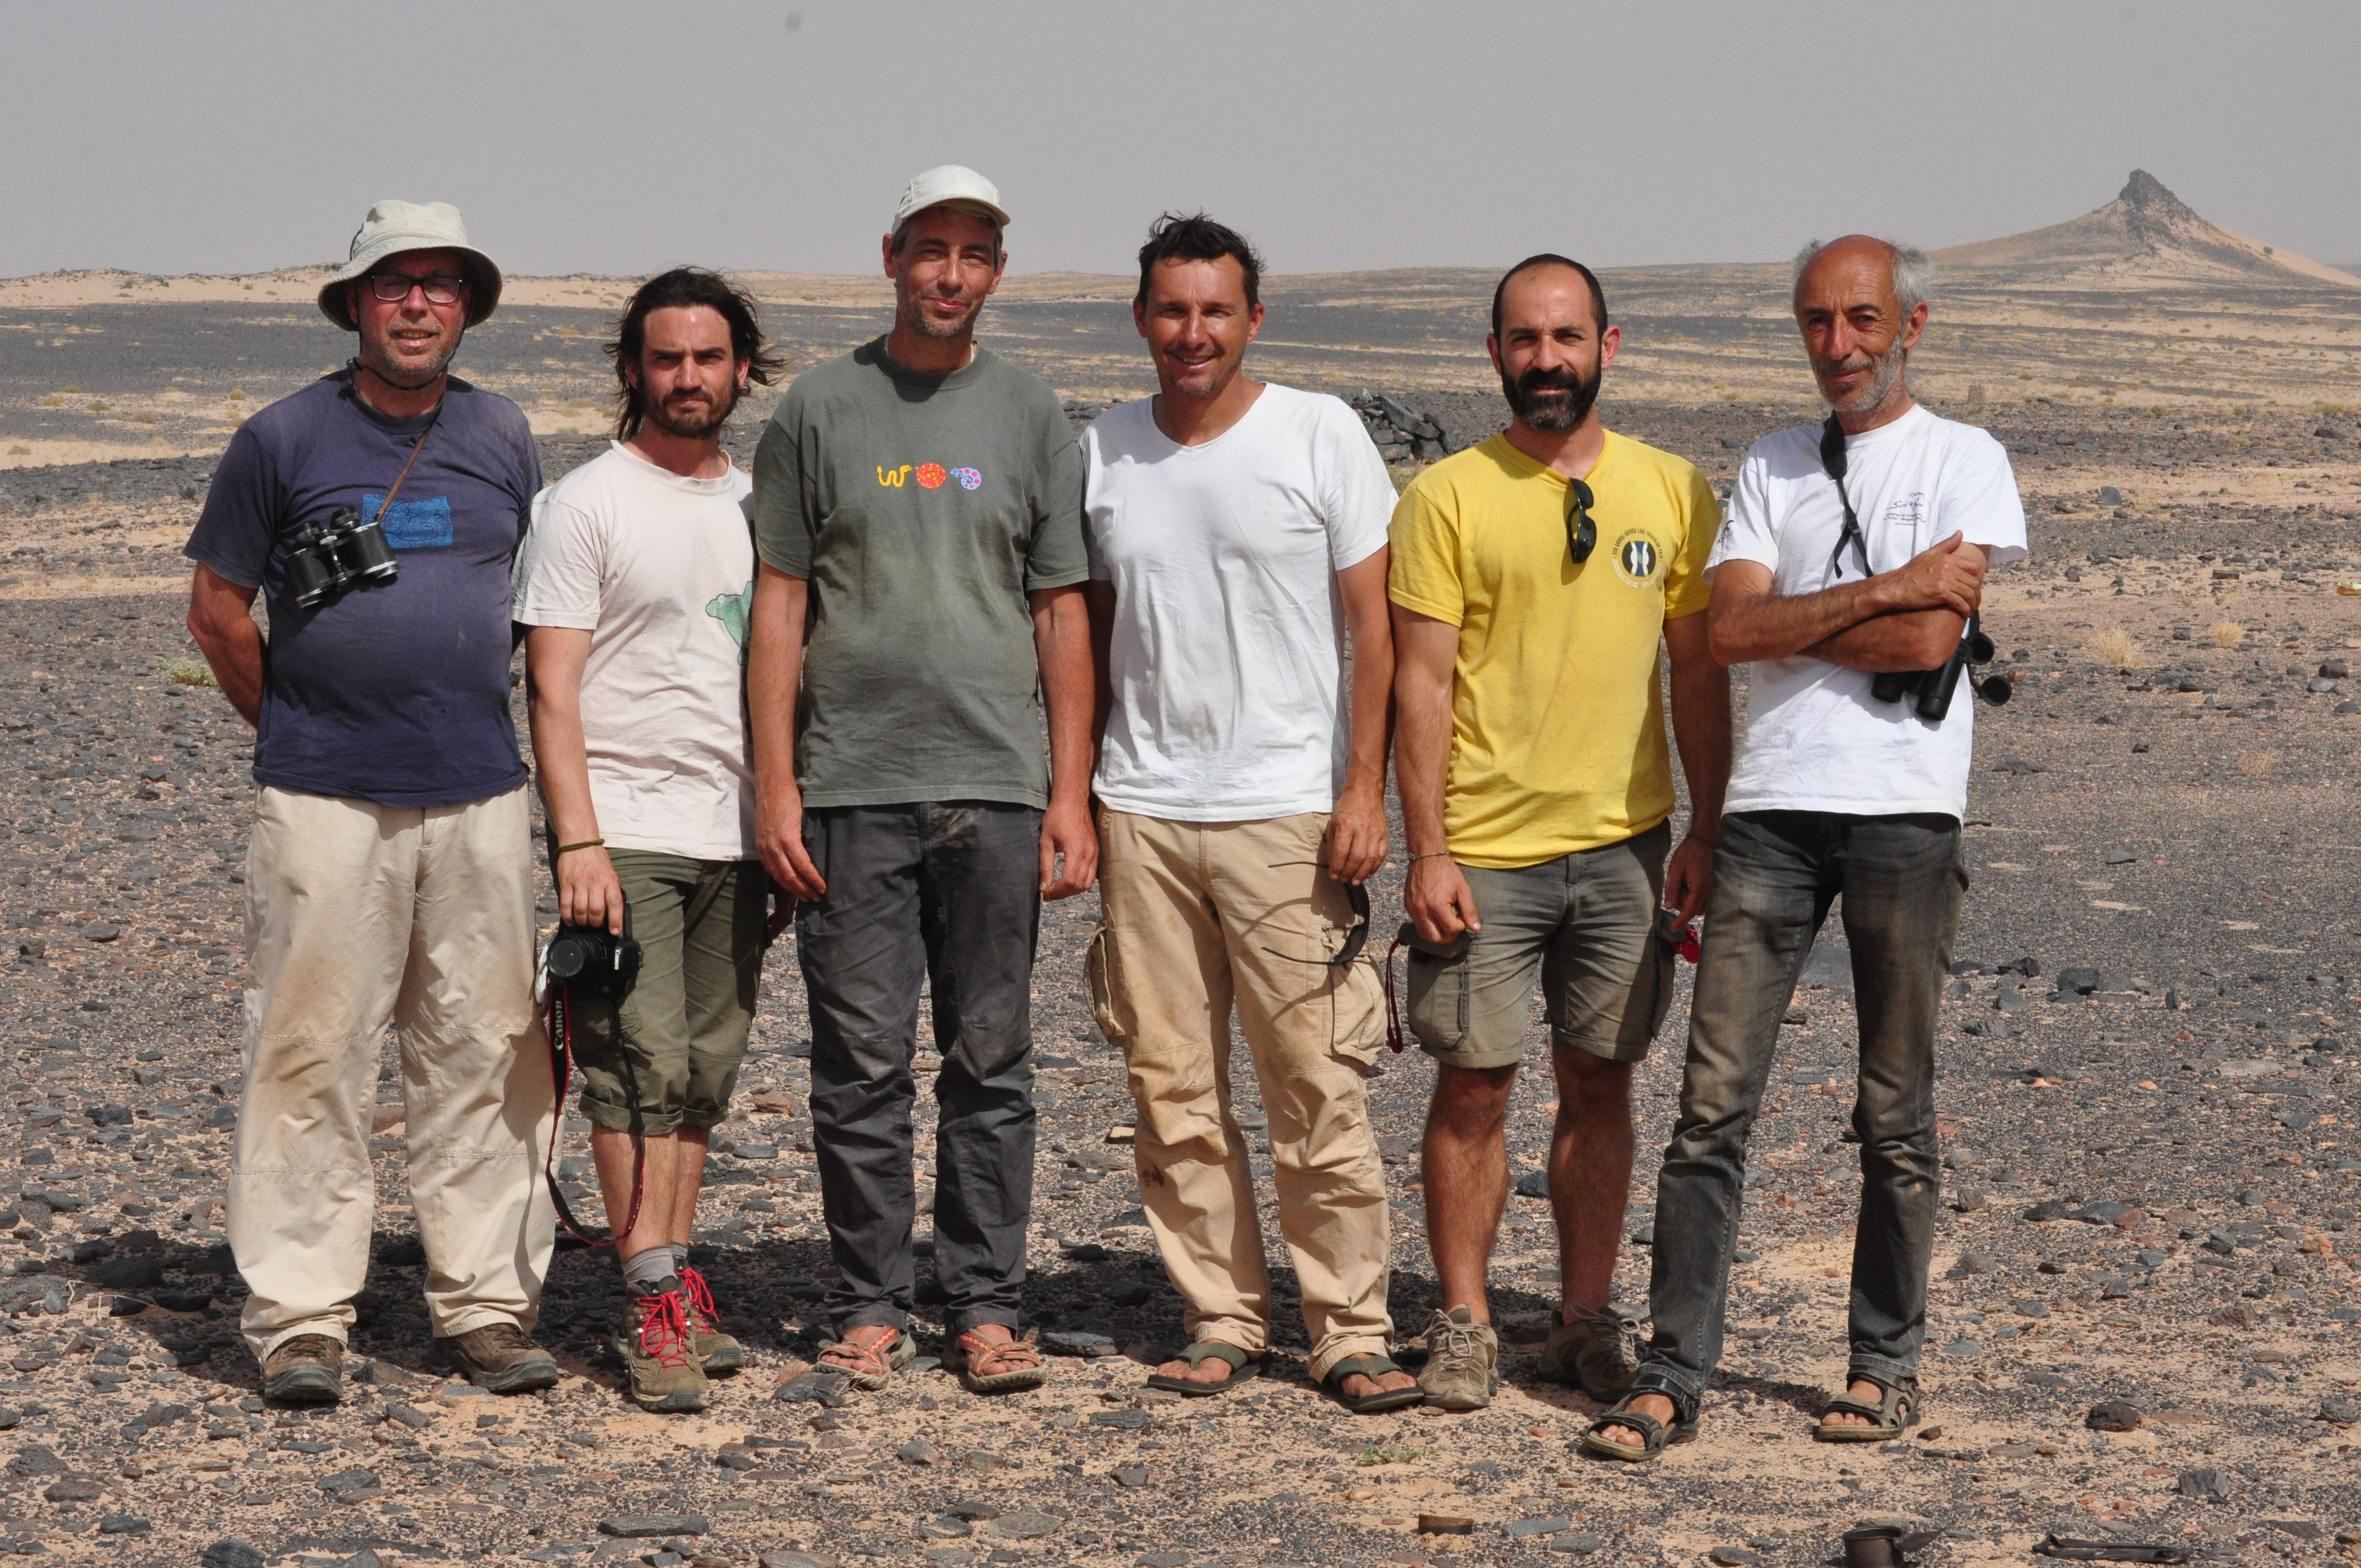 Six of the researchers involved in the project standing together for a photo with the desert in the background.